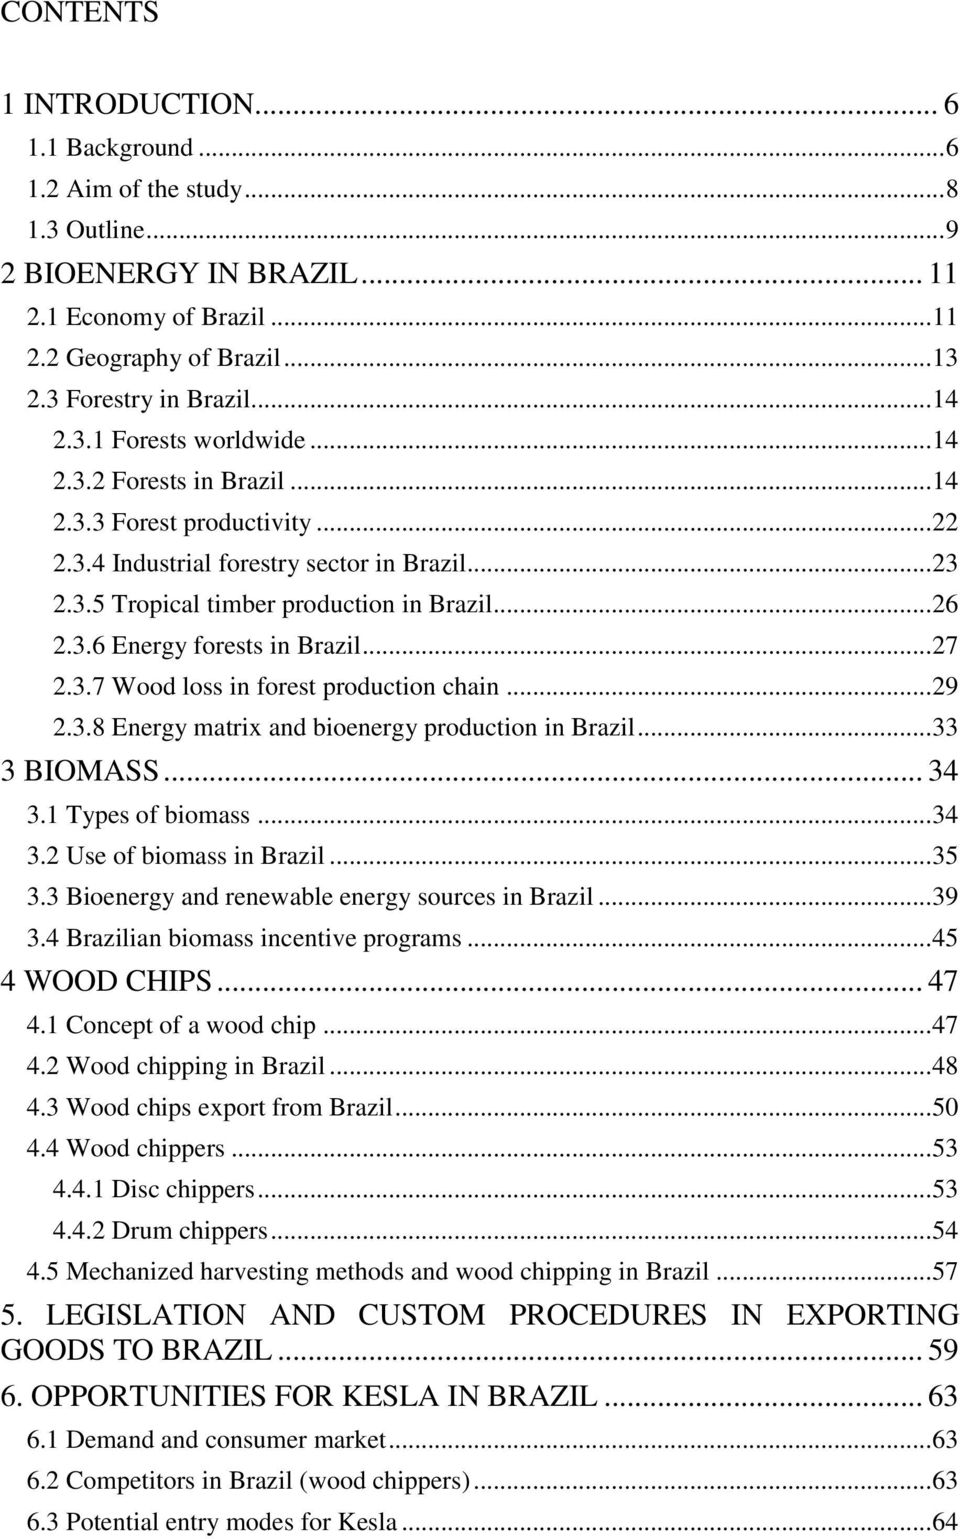 .. 26 2.3.6 Energy forests in Brazil... 27 2.3.7 Wood loss in forest production chain... 29 2.3.8 Energy matrix and bioenergy production in Brazil... 33 3 BIOMASS... 34 3.1 Types of biomass... 34 3.2 Use of biomass in Brazil.